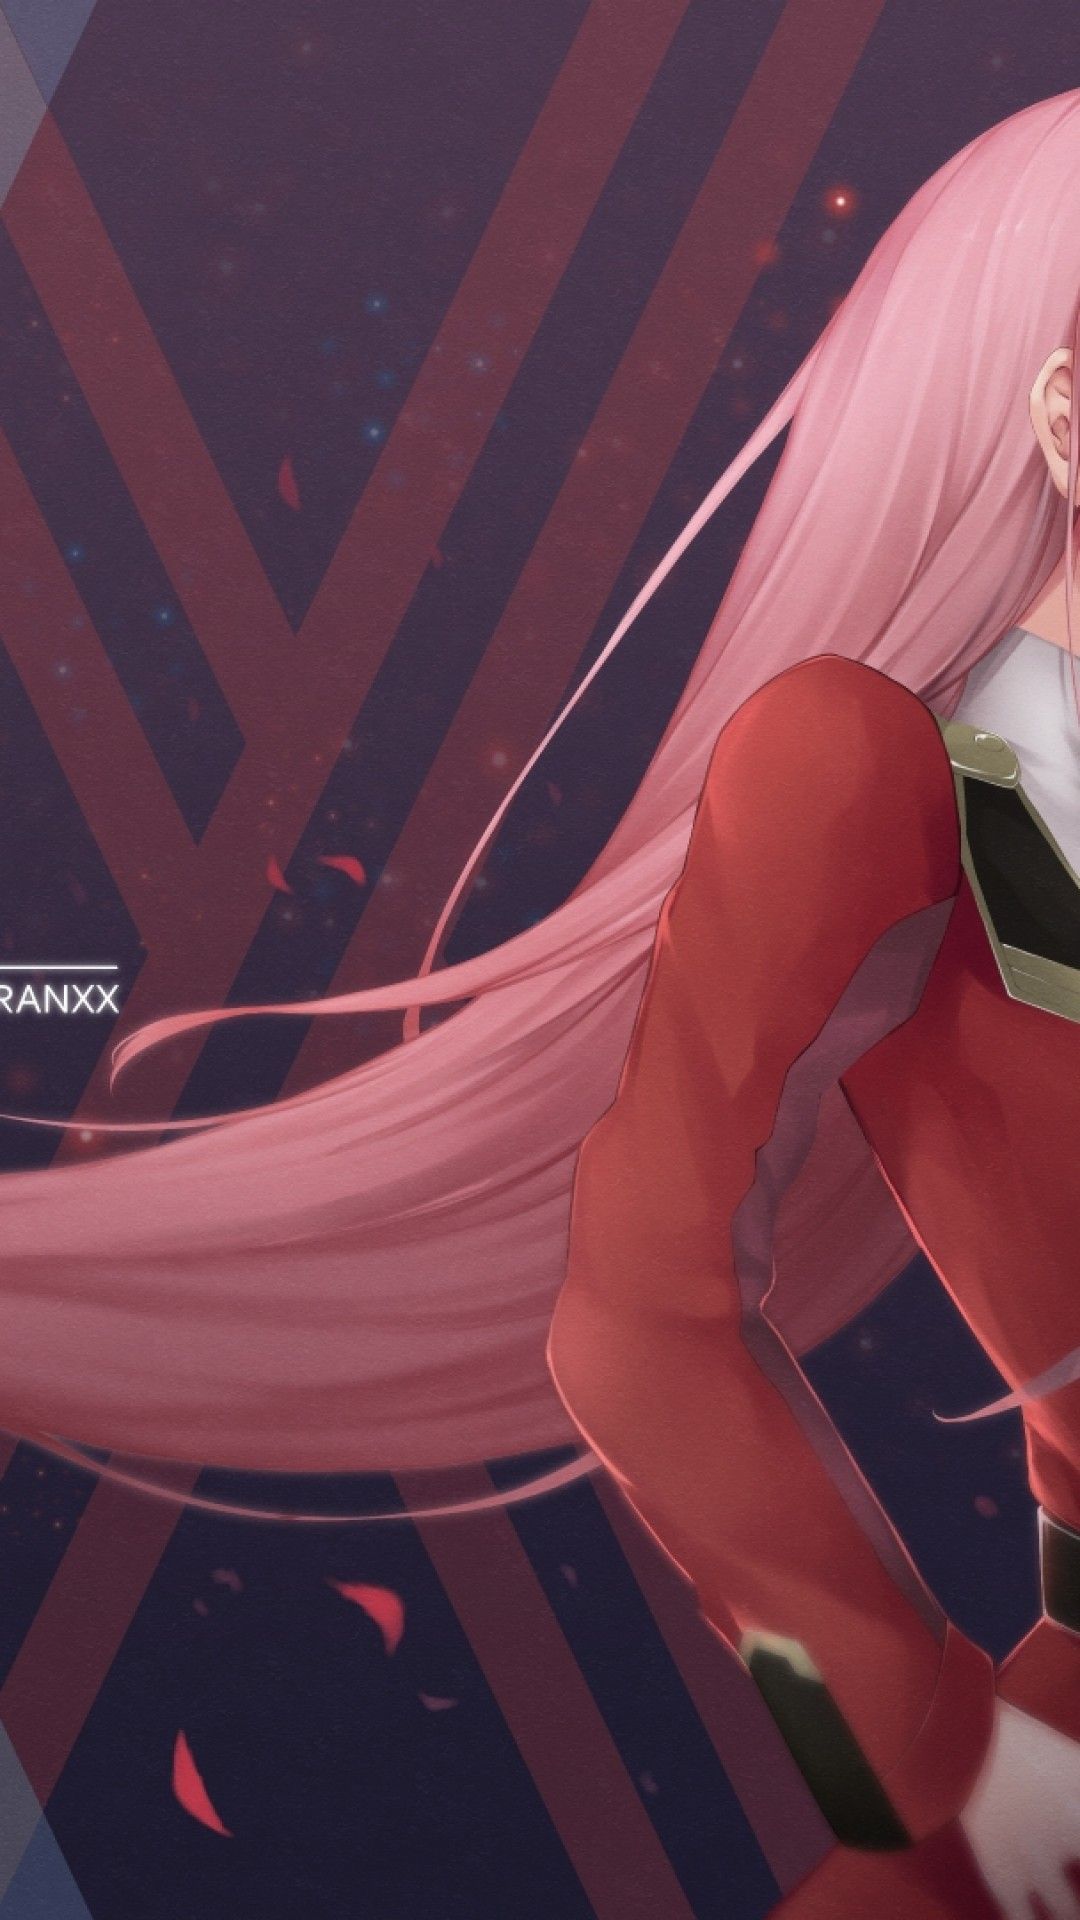 Zero Two Hd Iphone Wallpapers Wallpaper Cave